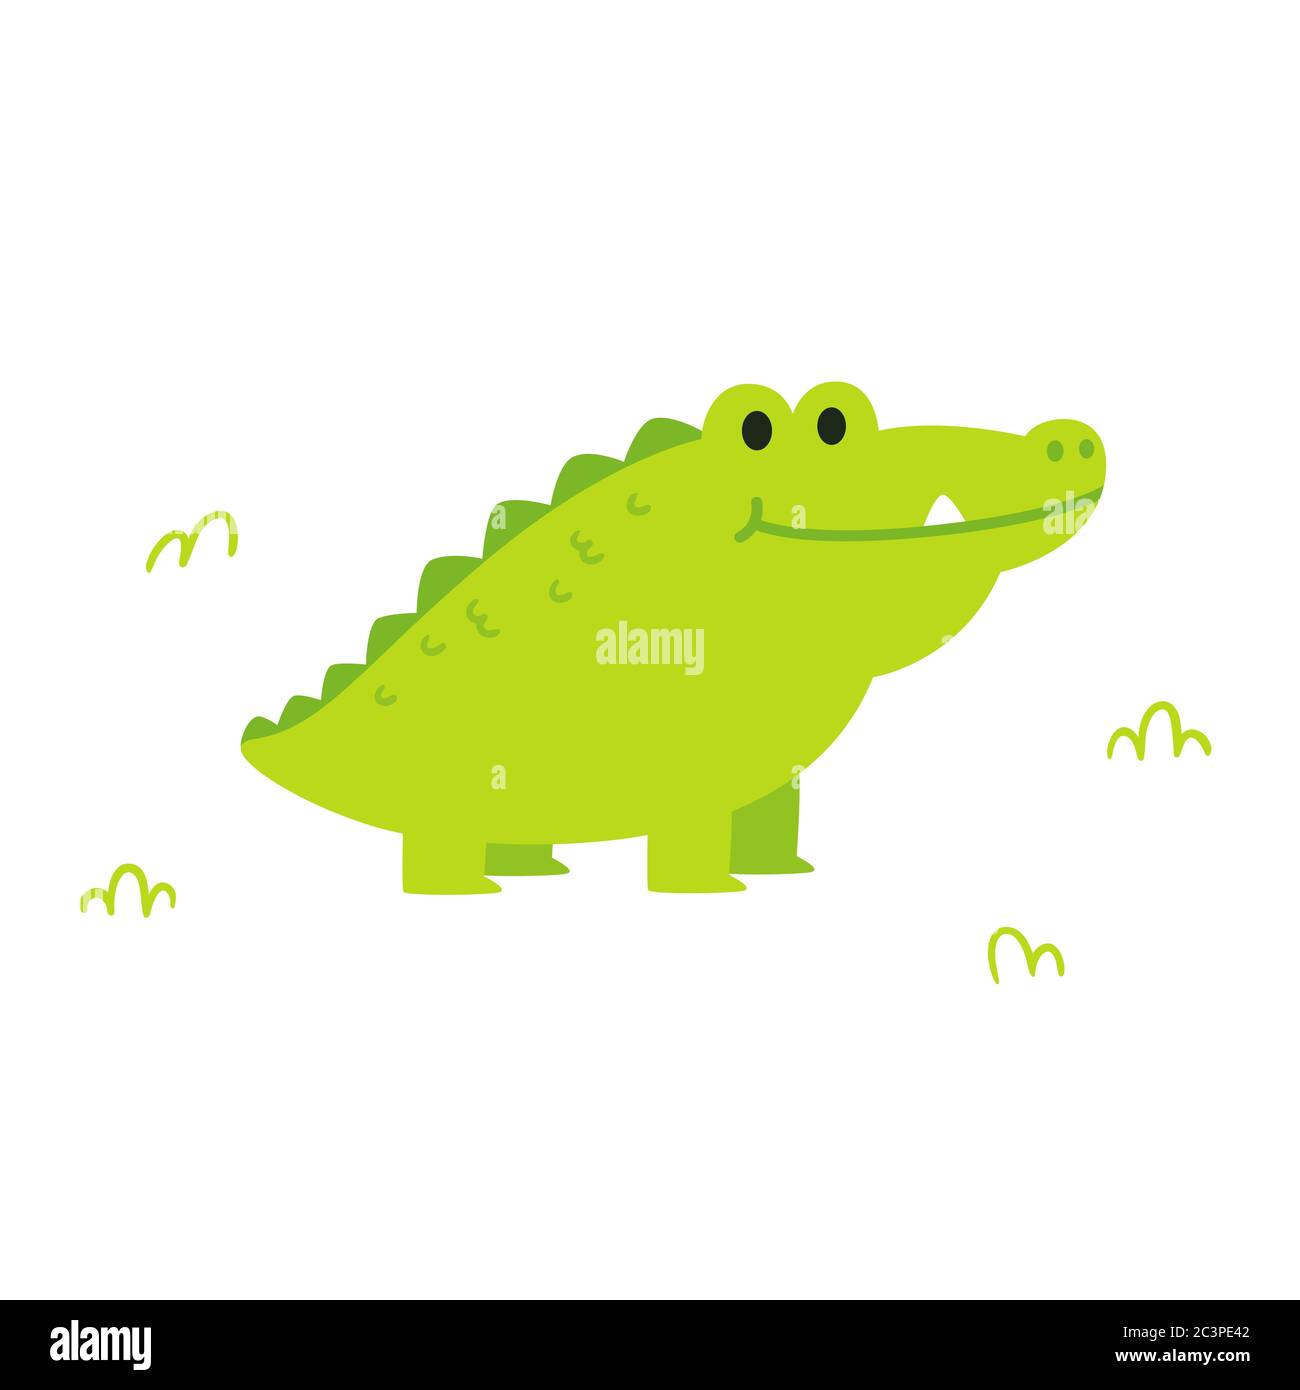 Cute cartoon chubby alligator or crocodile in simple flat cartoon style. Funny clip art illustration for kids. Isolated vector clip art drawing. Stock Vector